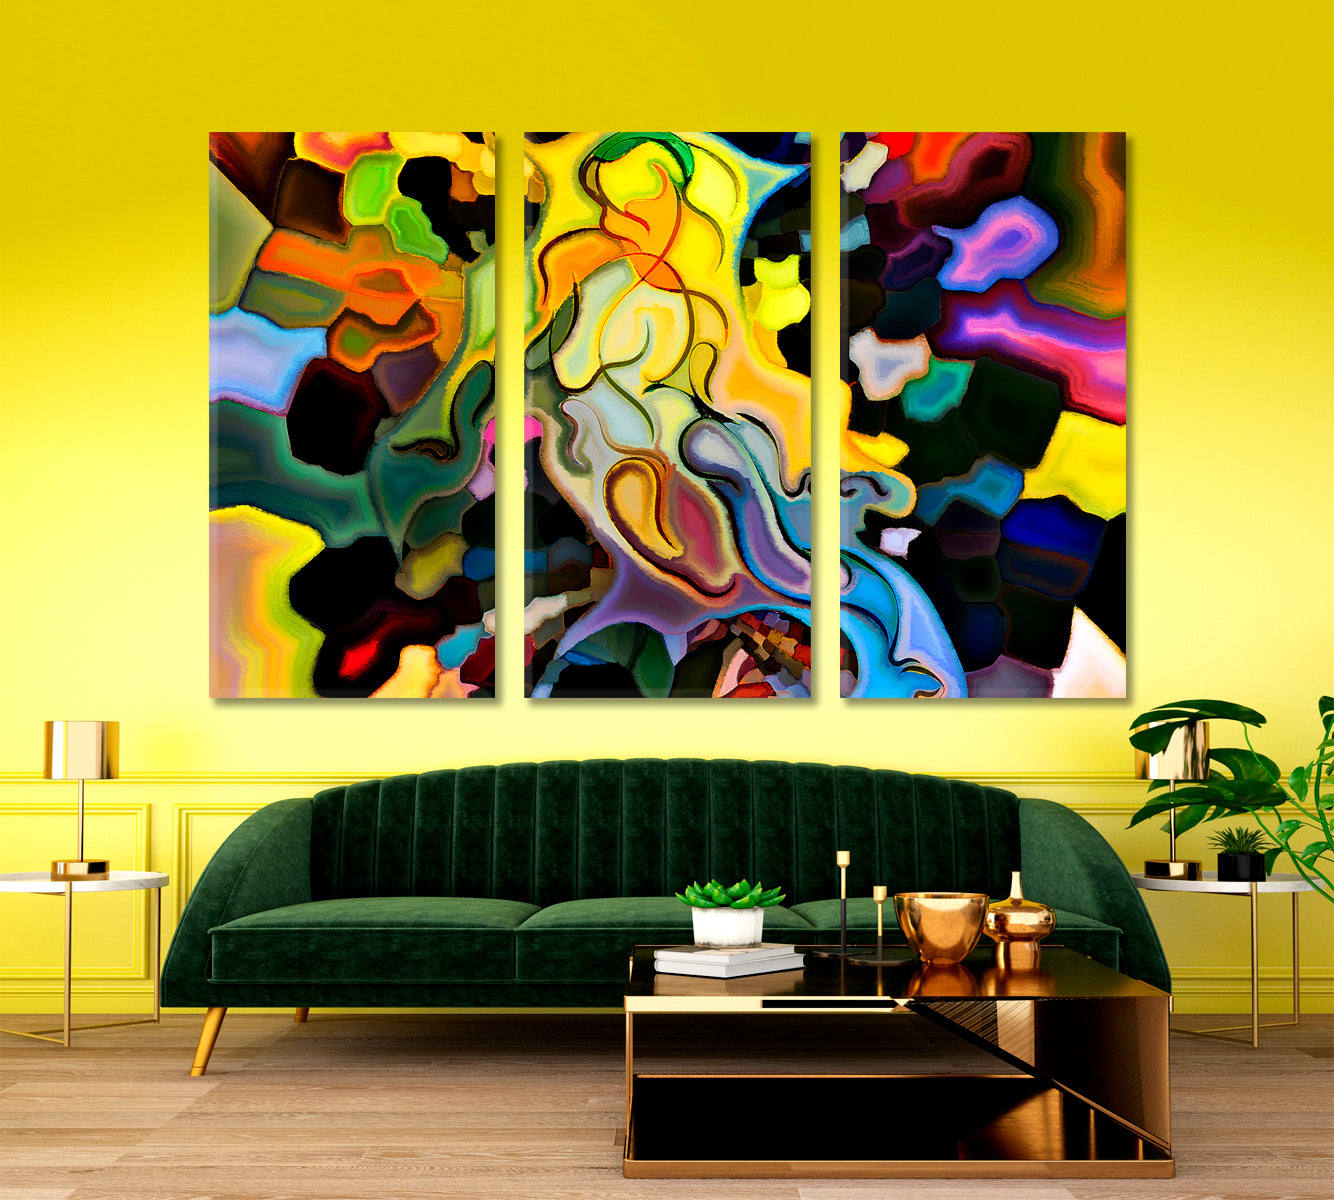 Human and Geometric Forms Collection Abstract Creativity and Imagination Abstract Art Print Artesty 3 panels 36" x 24" 